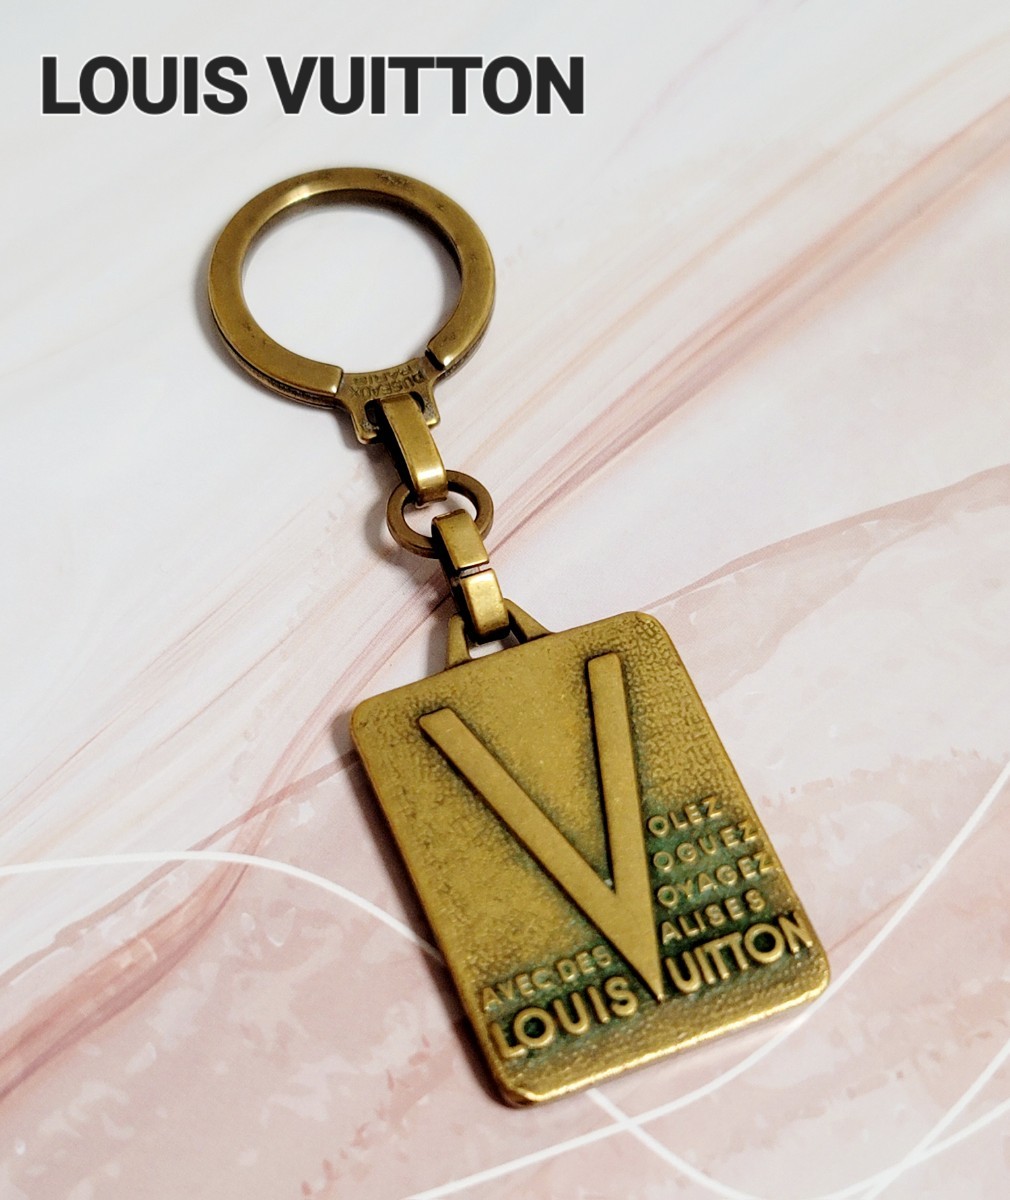 【LOUIS VUITTON】ルイヴィトン キーホルダー キーリング チャーム MALLETIER DEPUIS 1854 ヴィンテージ レア